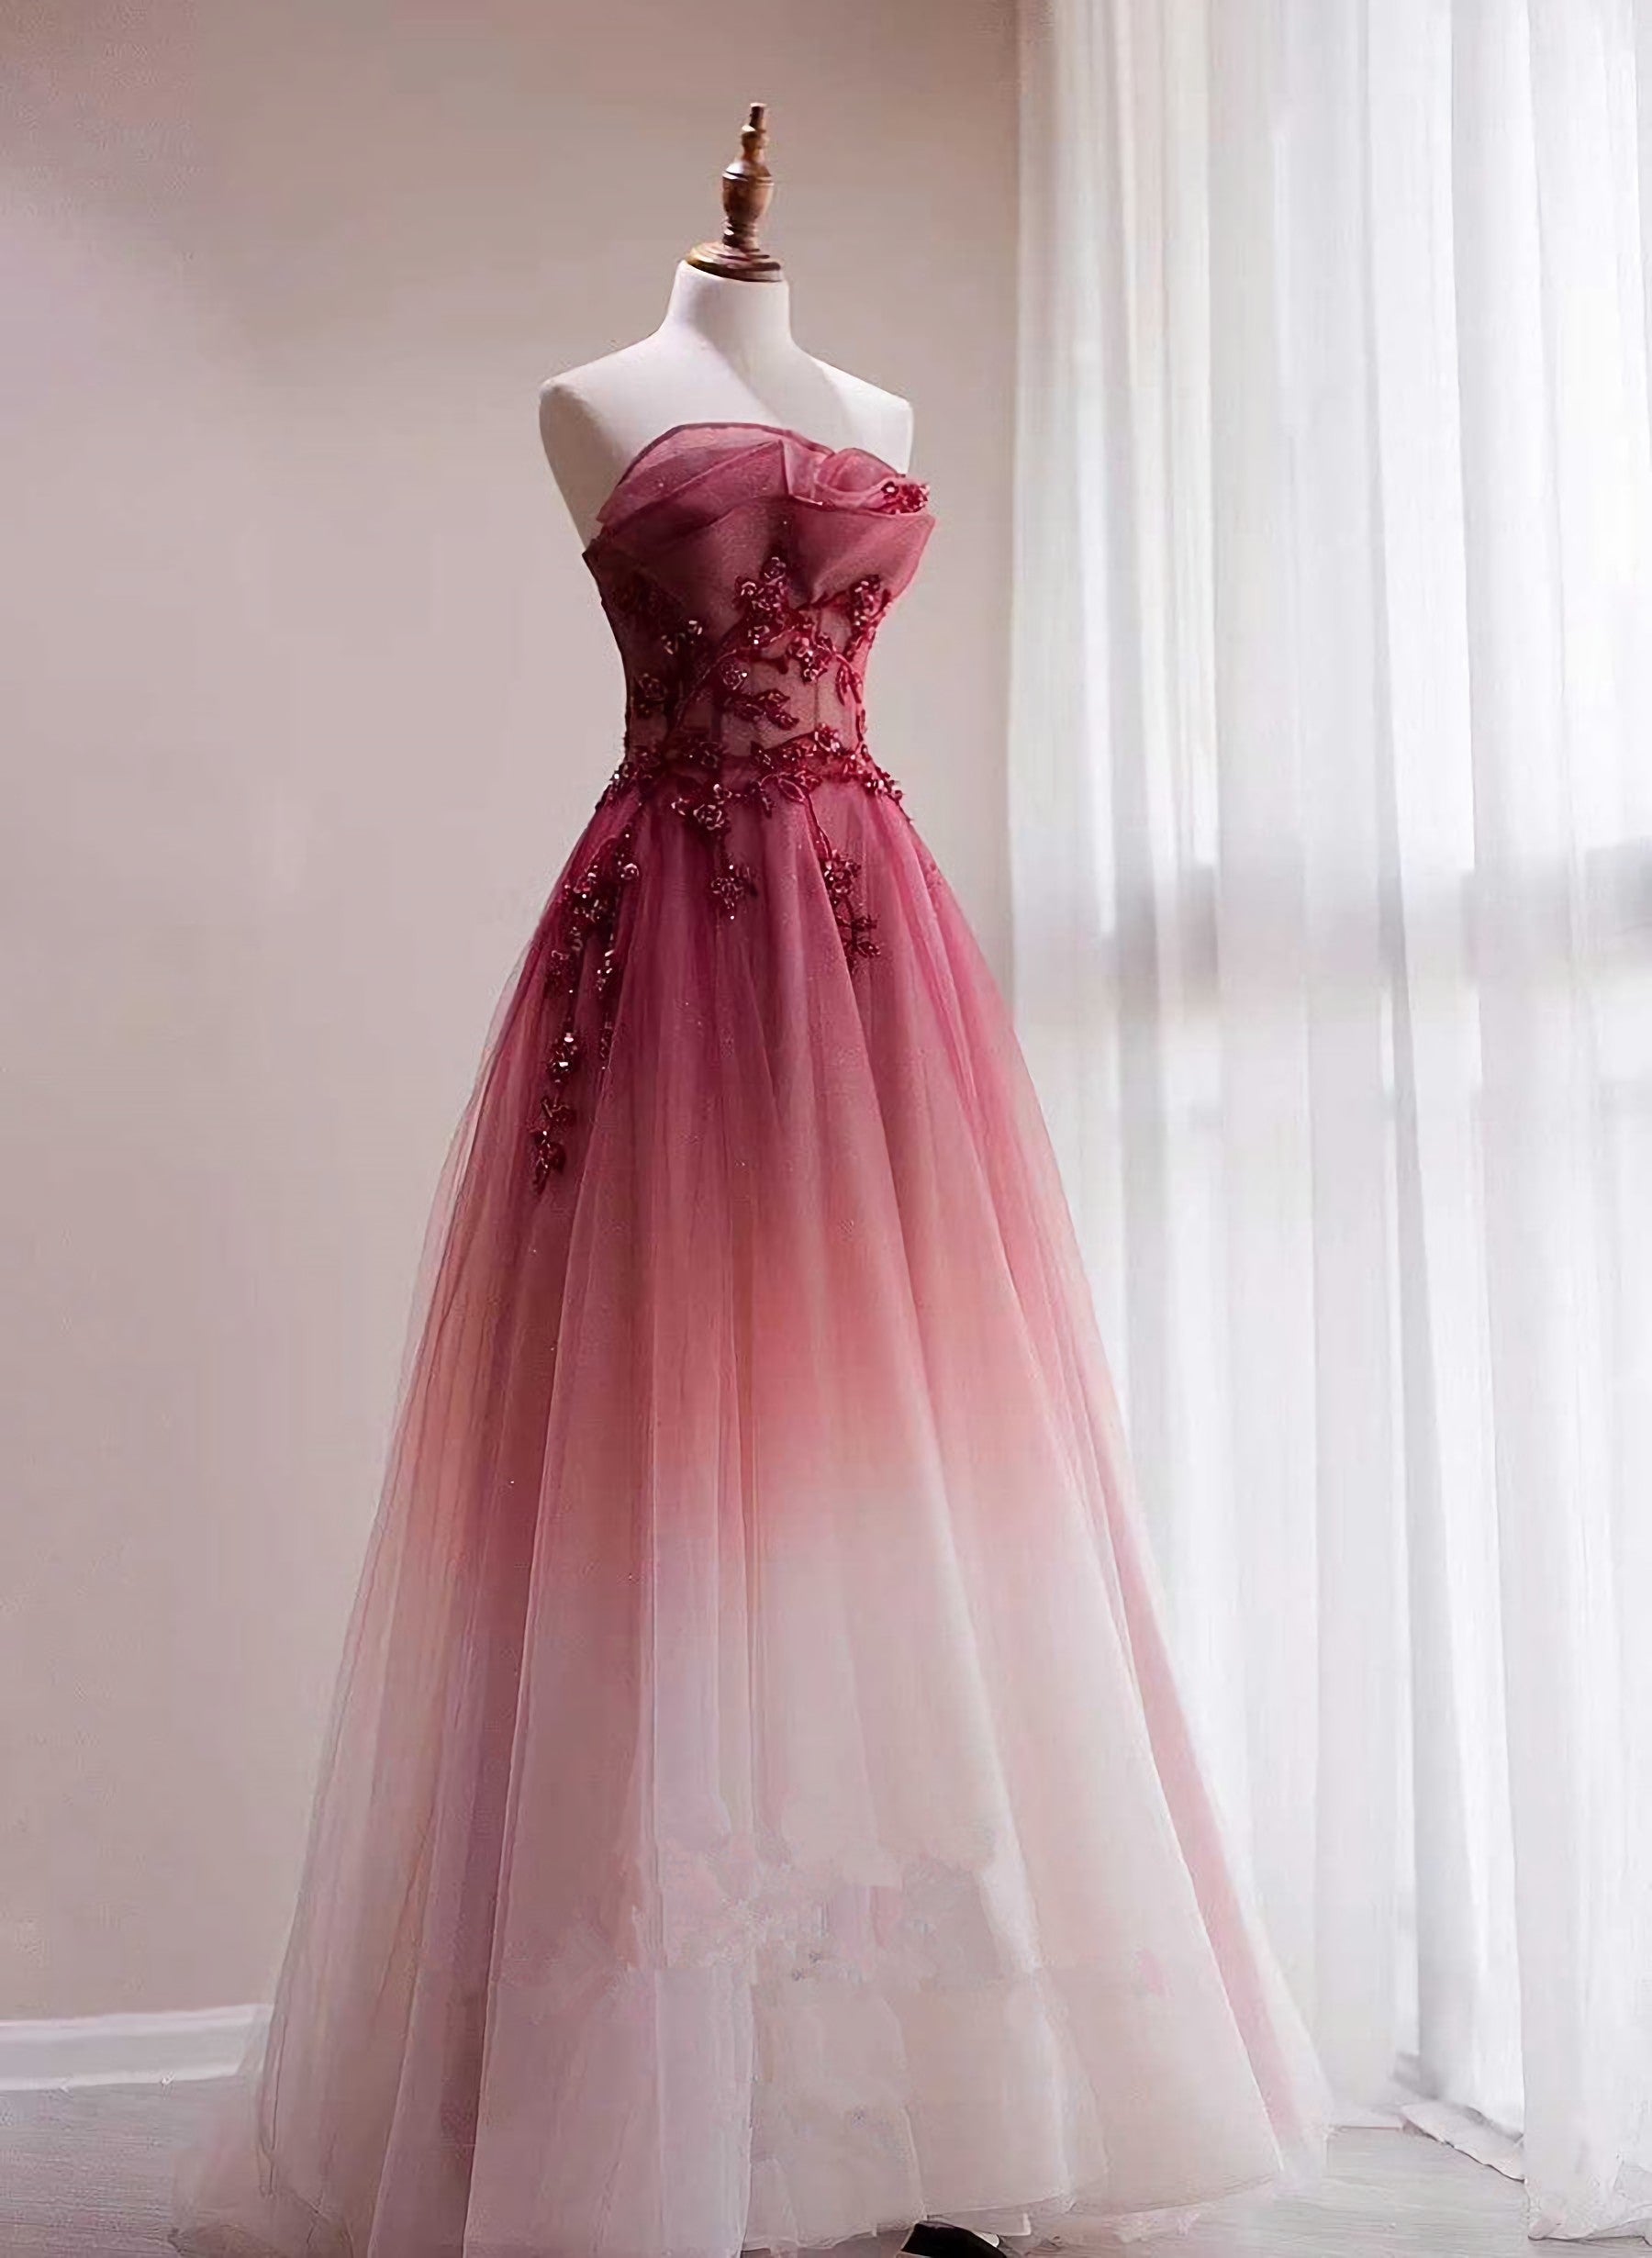 Formal Dress Ideas, Red Beaded Gradient Tulle Long Party Dress, A Line Elegant Lace Up Prom Dress